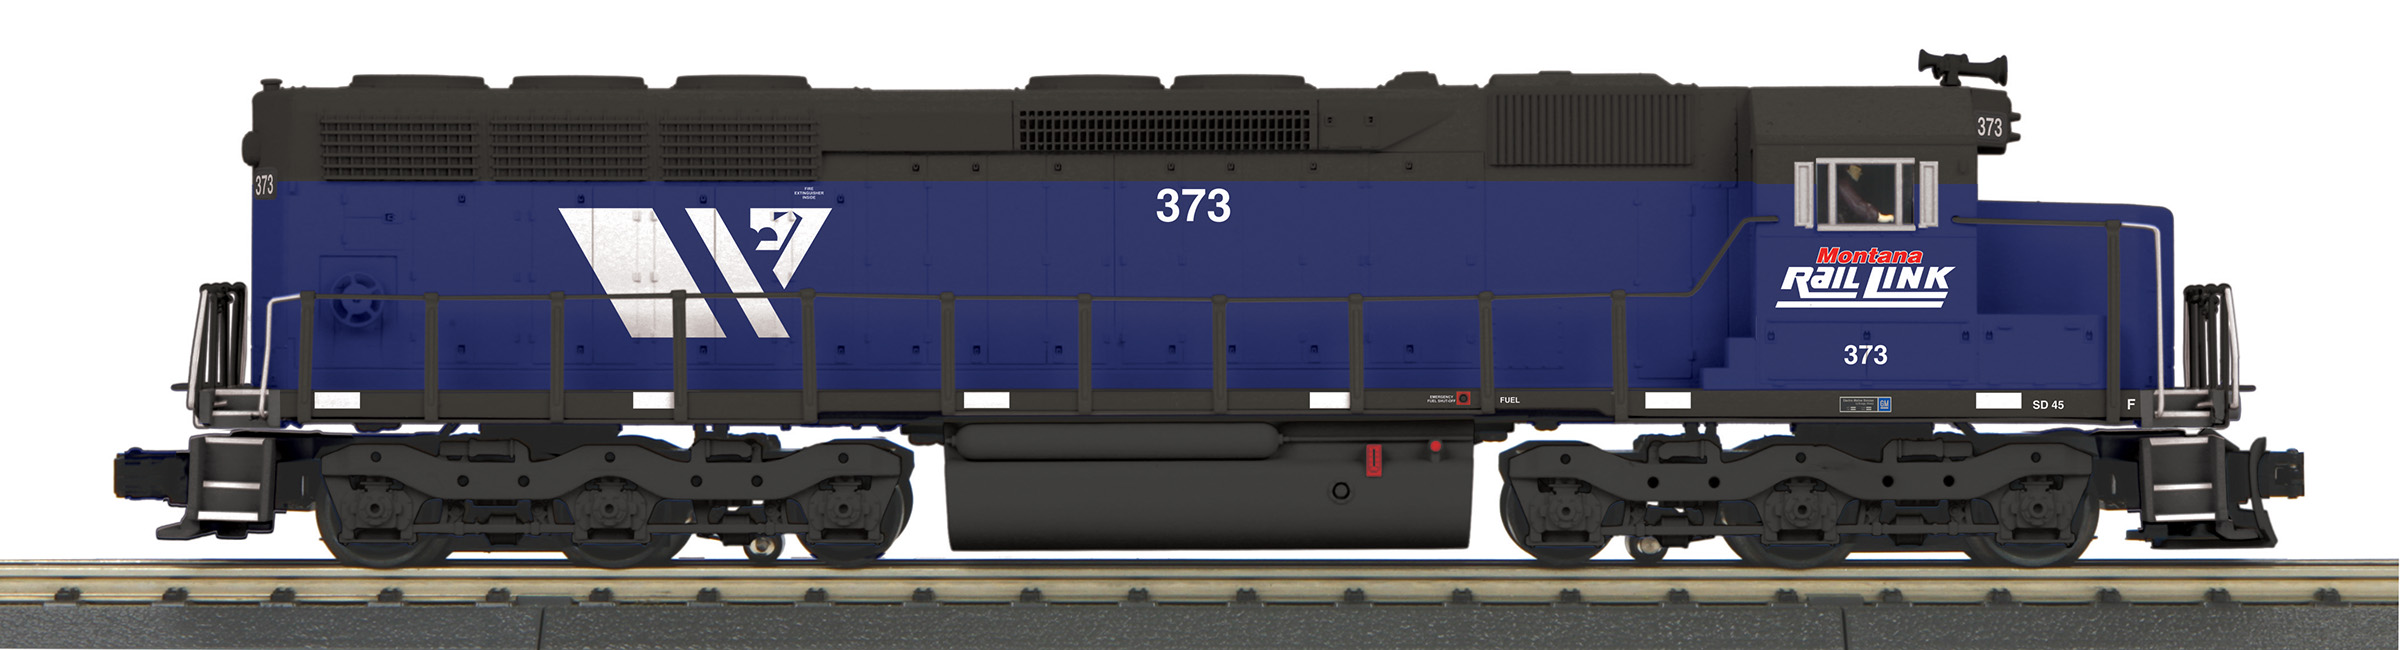 30-21120-1 | MTH ELECTRIC TRAINS